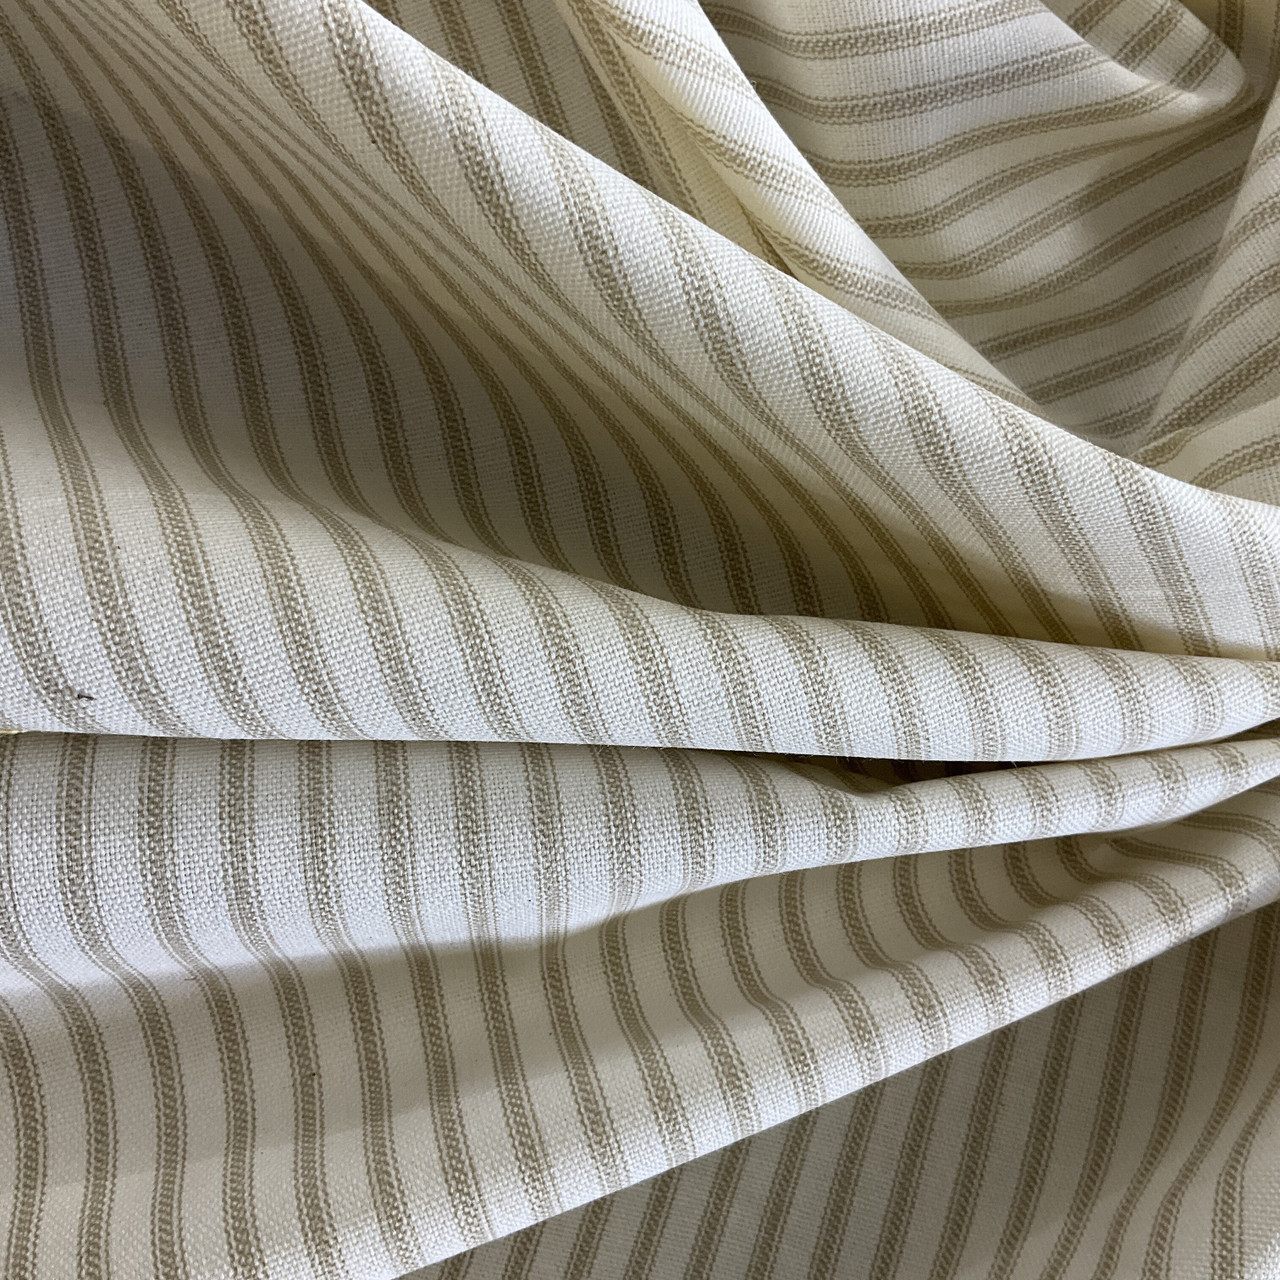 Beige White Stripe Fabric, Tan Upholstery Cotton Duck Canvas